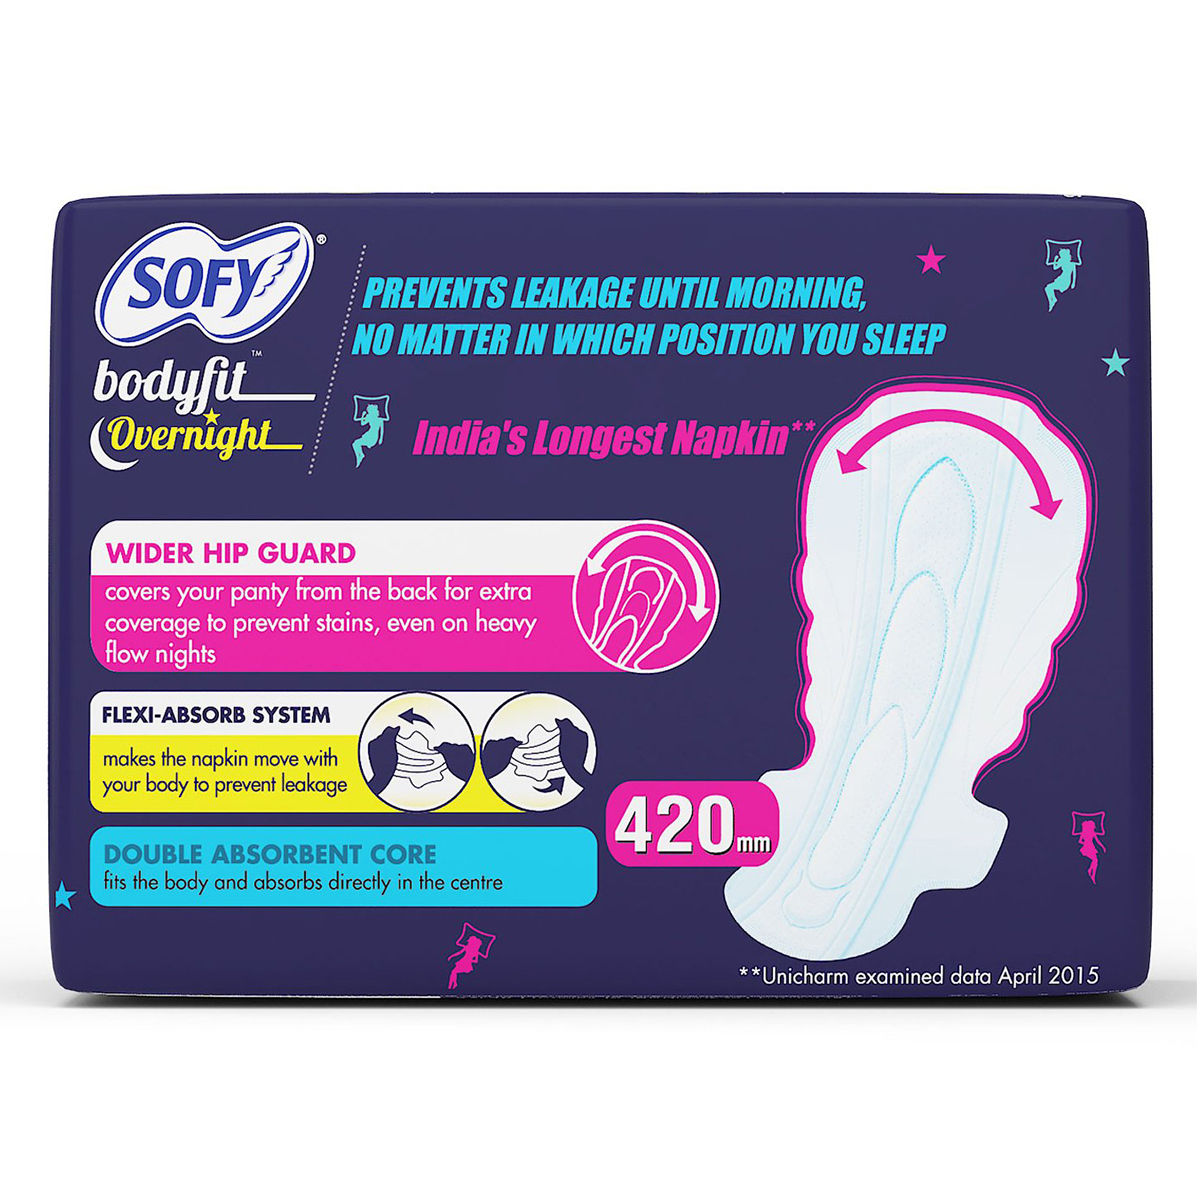 Sofy Bodyfit Overnight Sanitary Pads XXXL, 3 Count, Pack of 1 